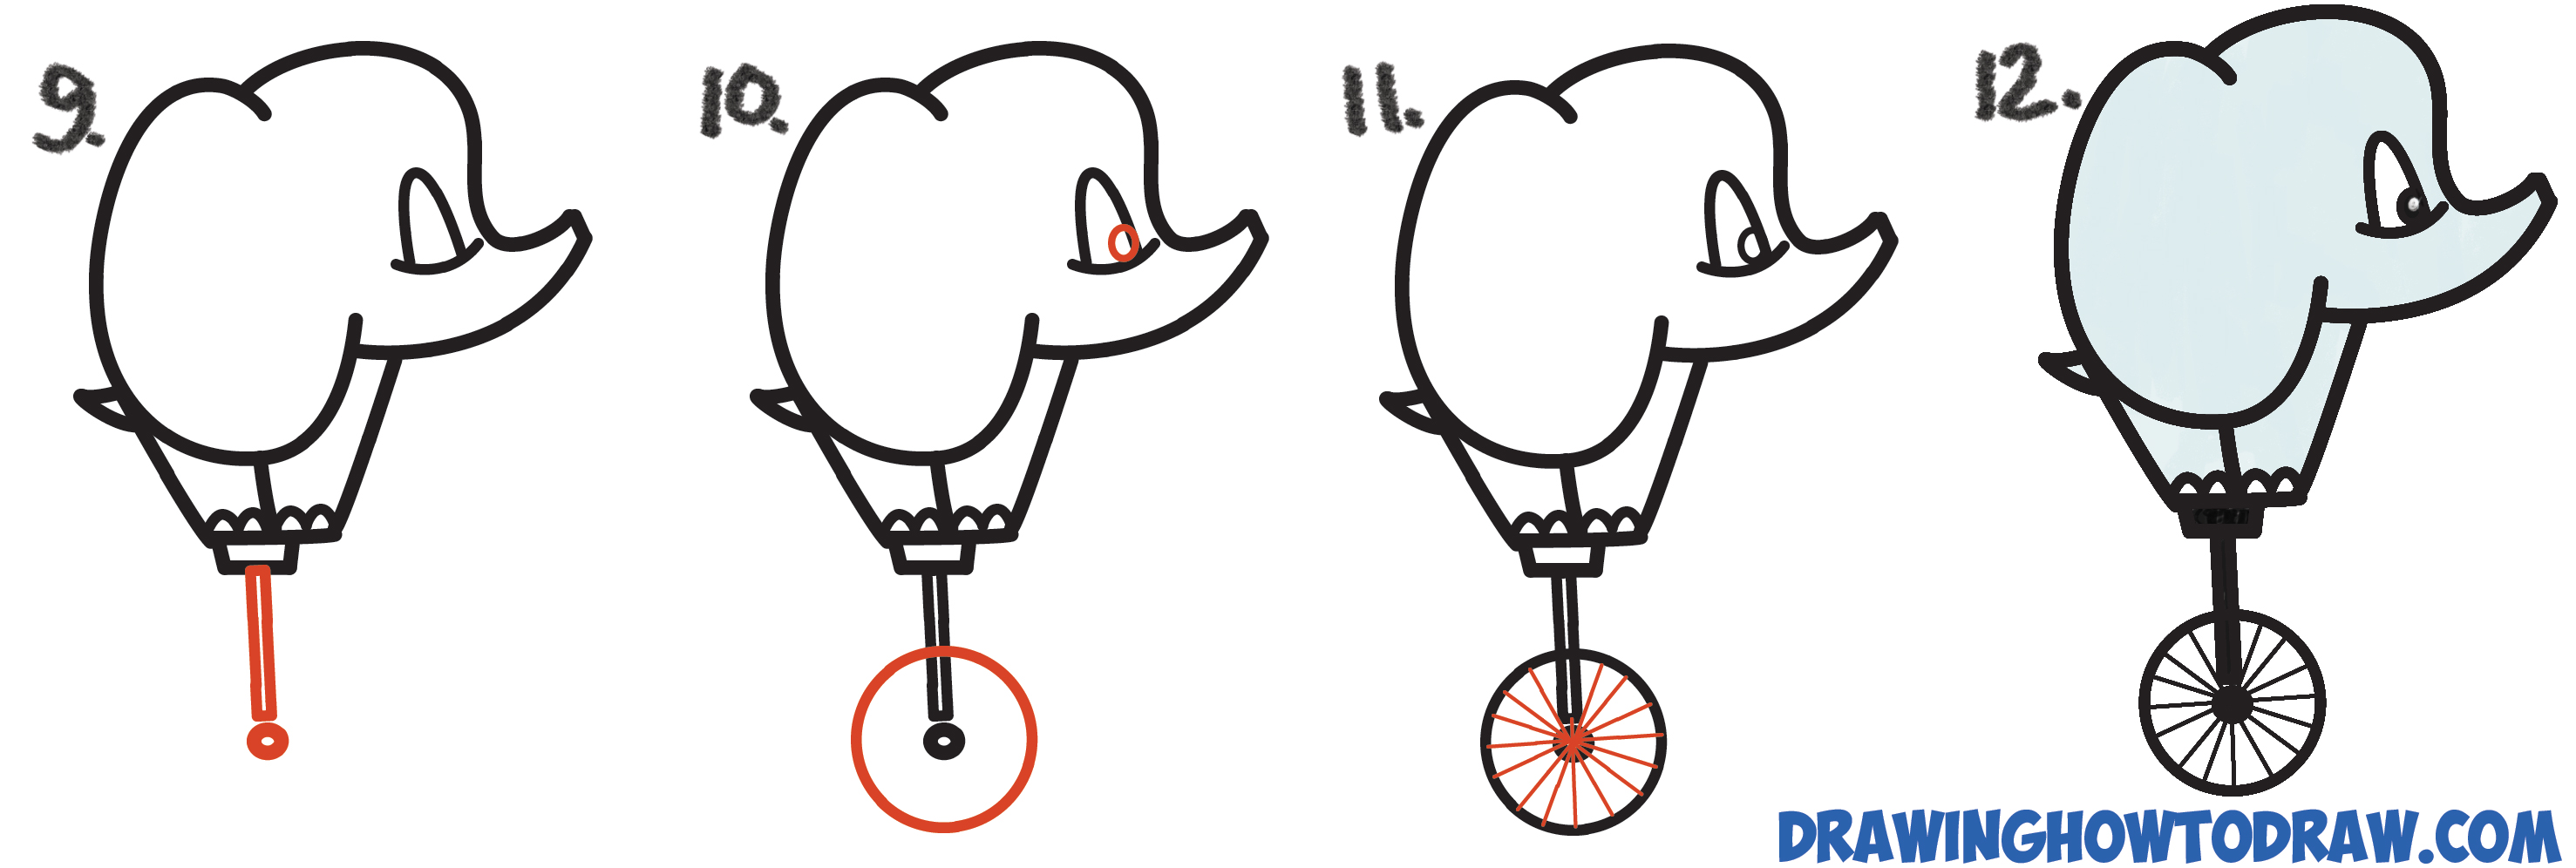 How To Draw A Cute Cartoon Baby Elephant Riding A Unicycle From